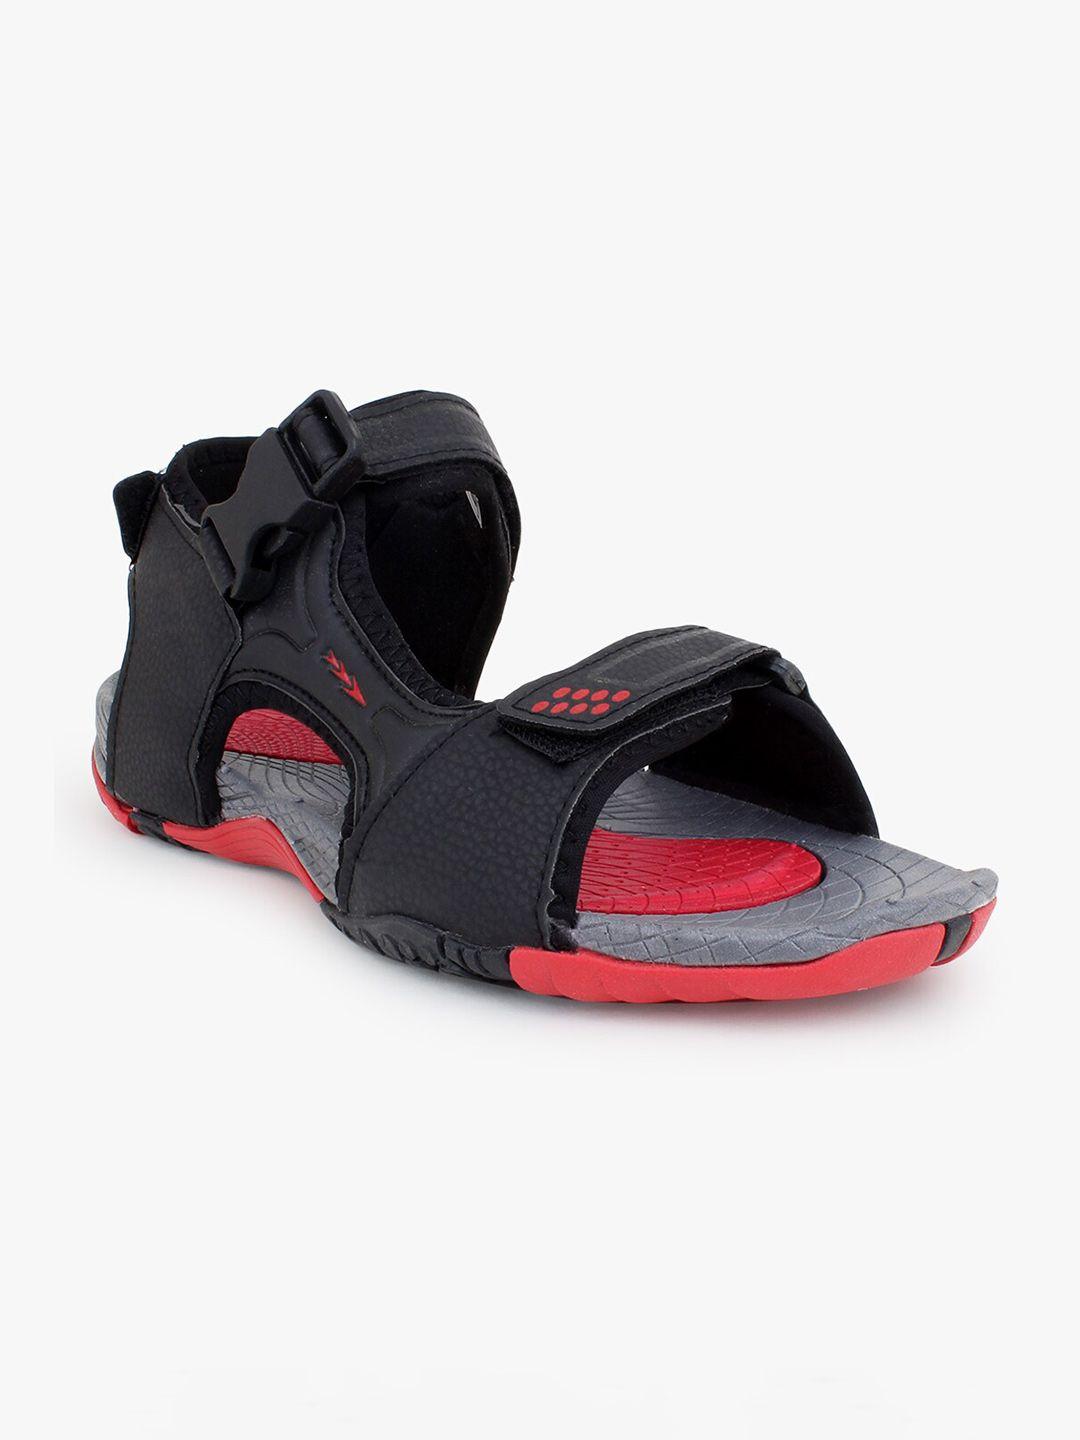 columbus-men-black-&-red-textured-synthetic-sports-sandals